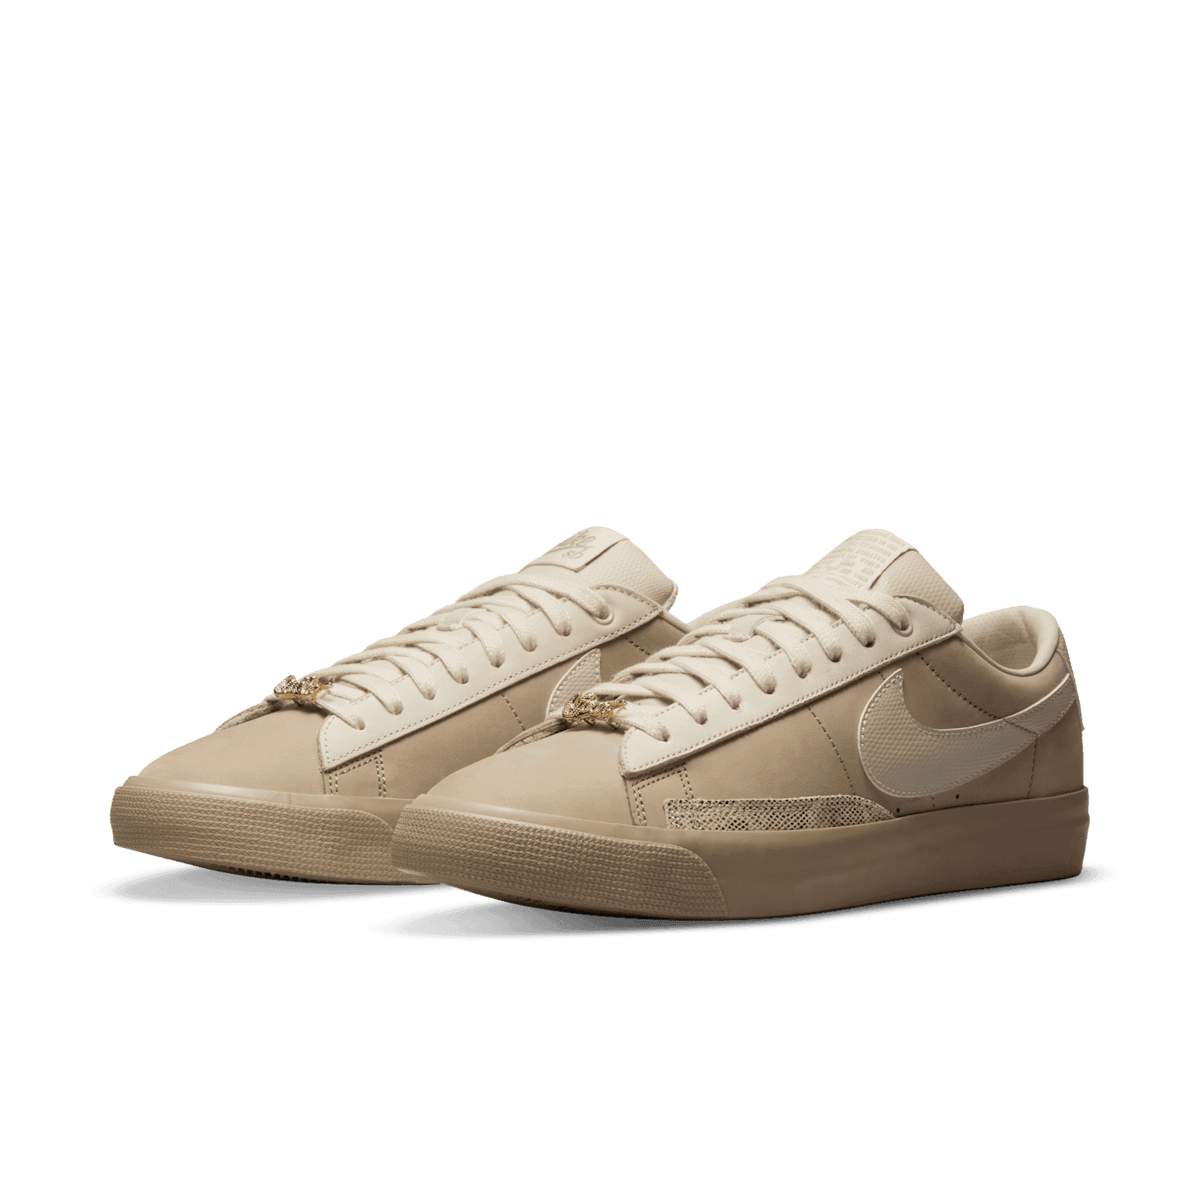 Nike SB Blazer Low FOURTY PERCENT AGAINST RIGHTS Tan Angle 2